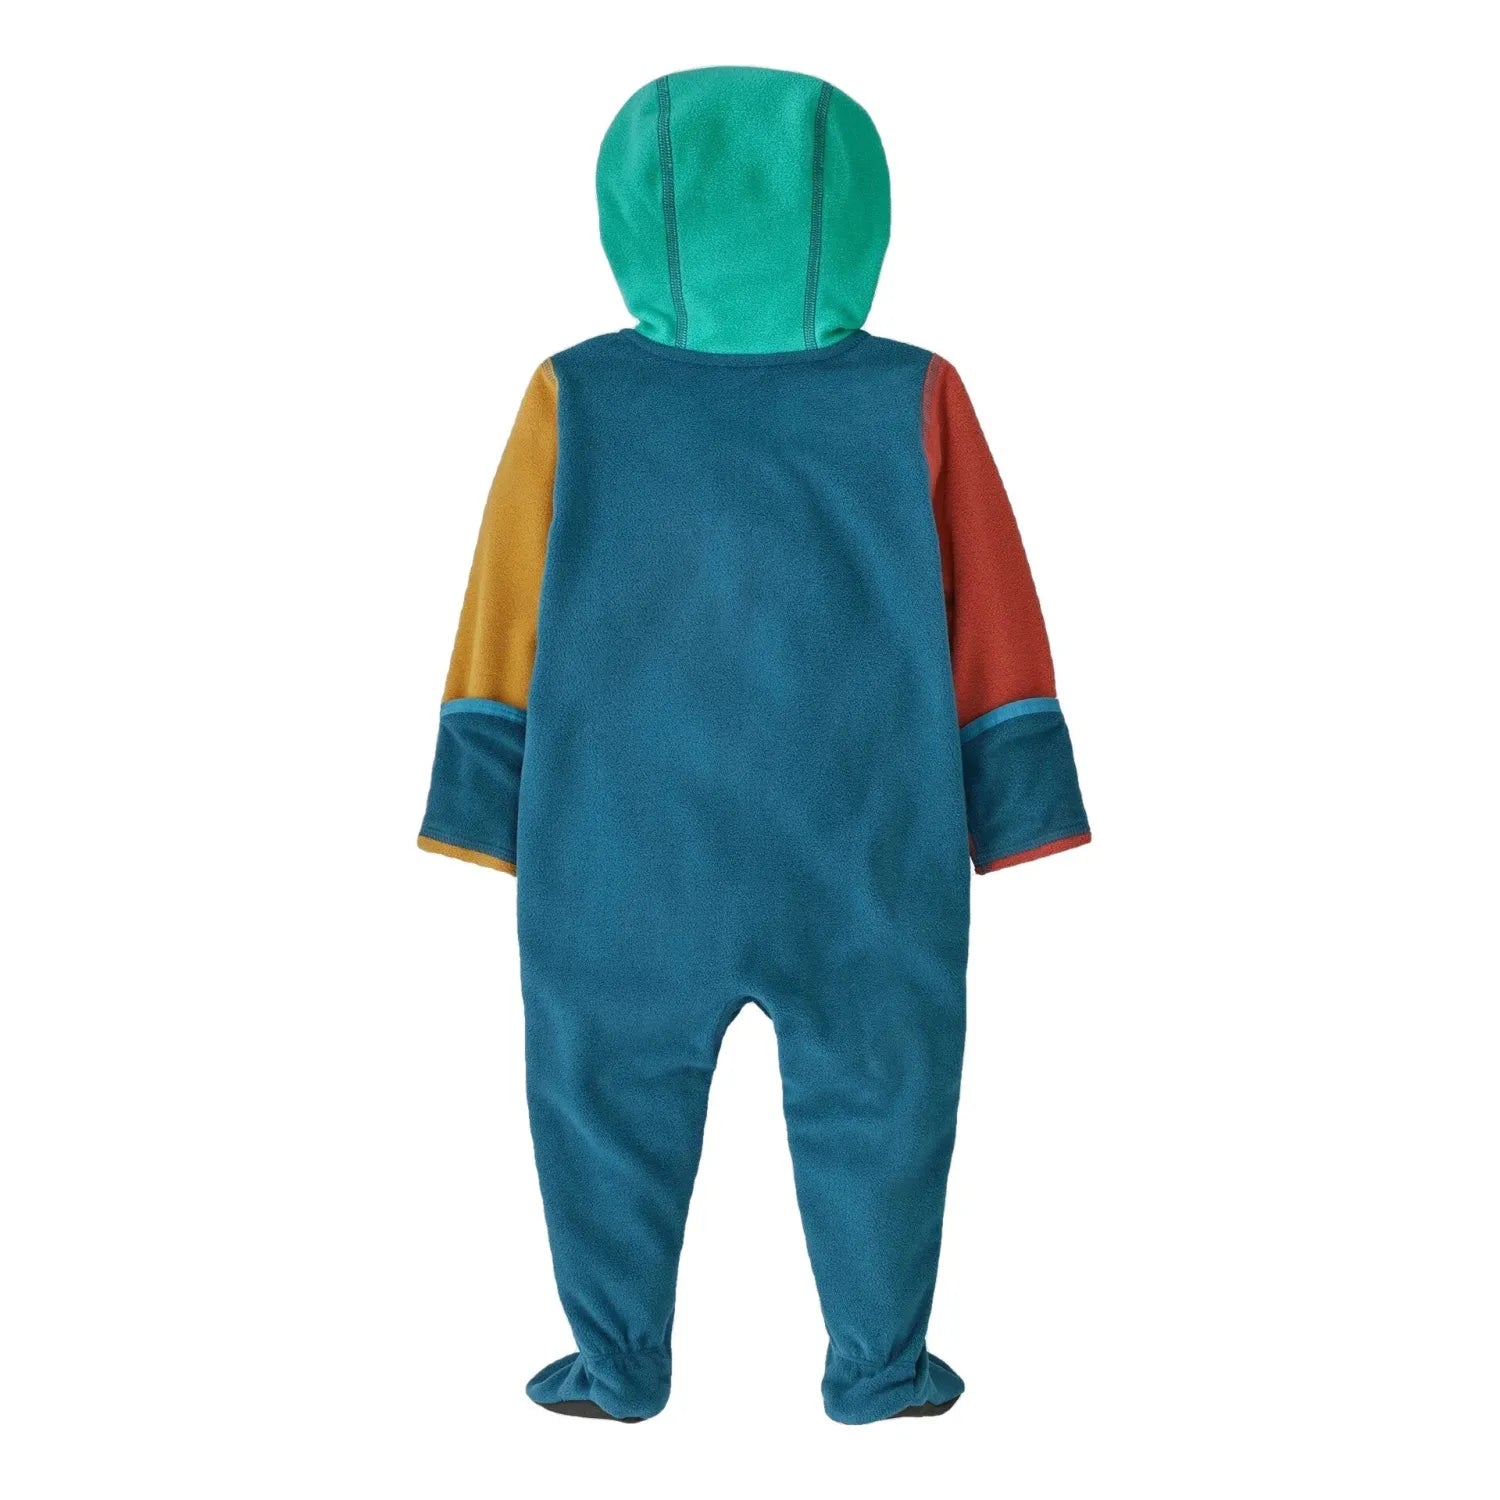 Patagonia Baby Micro D® Fleece Bunting shown in New Navy w/Belay Blue. Back view Blue body, red right sleeve, yellow left sleeve, and teal colored hood.